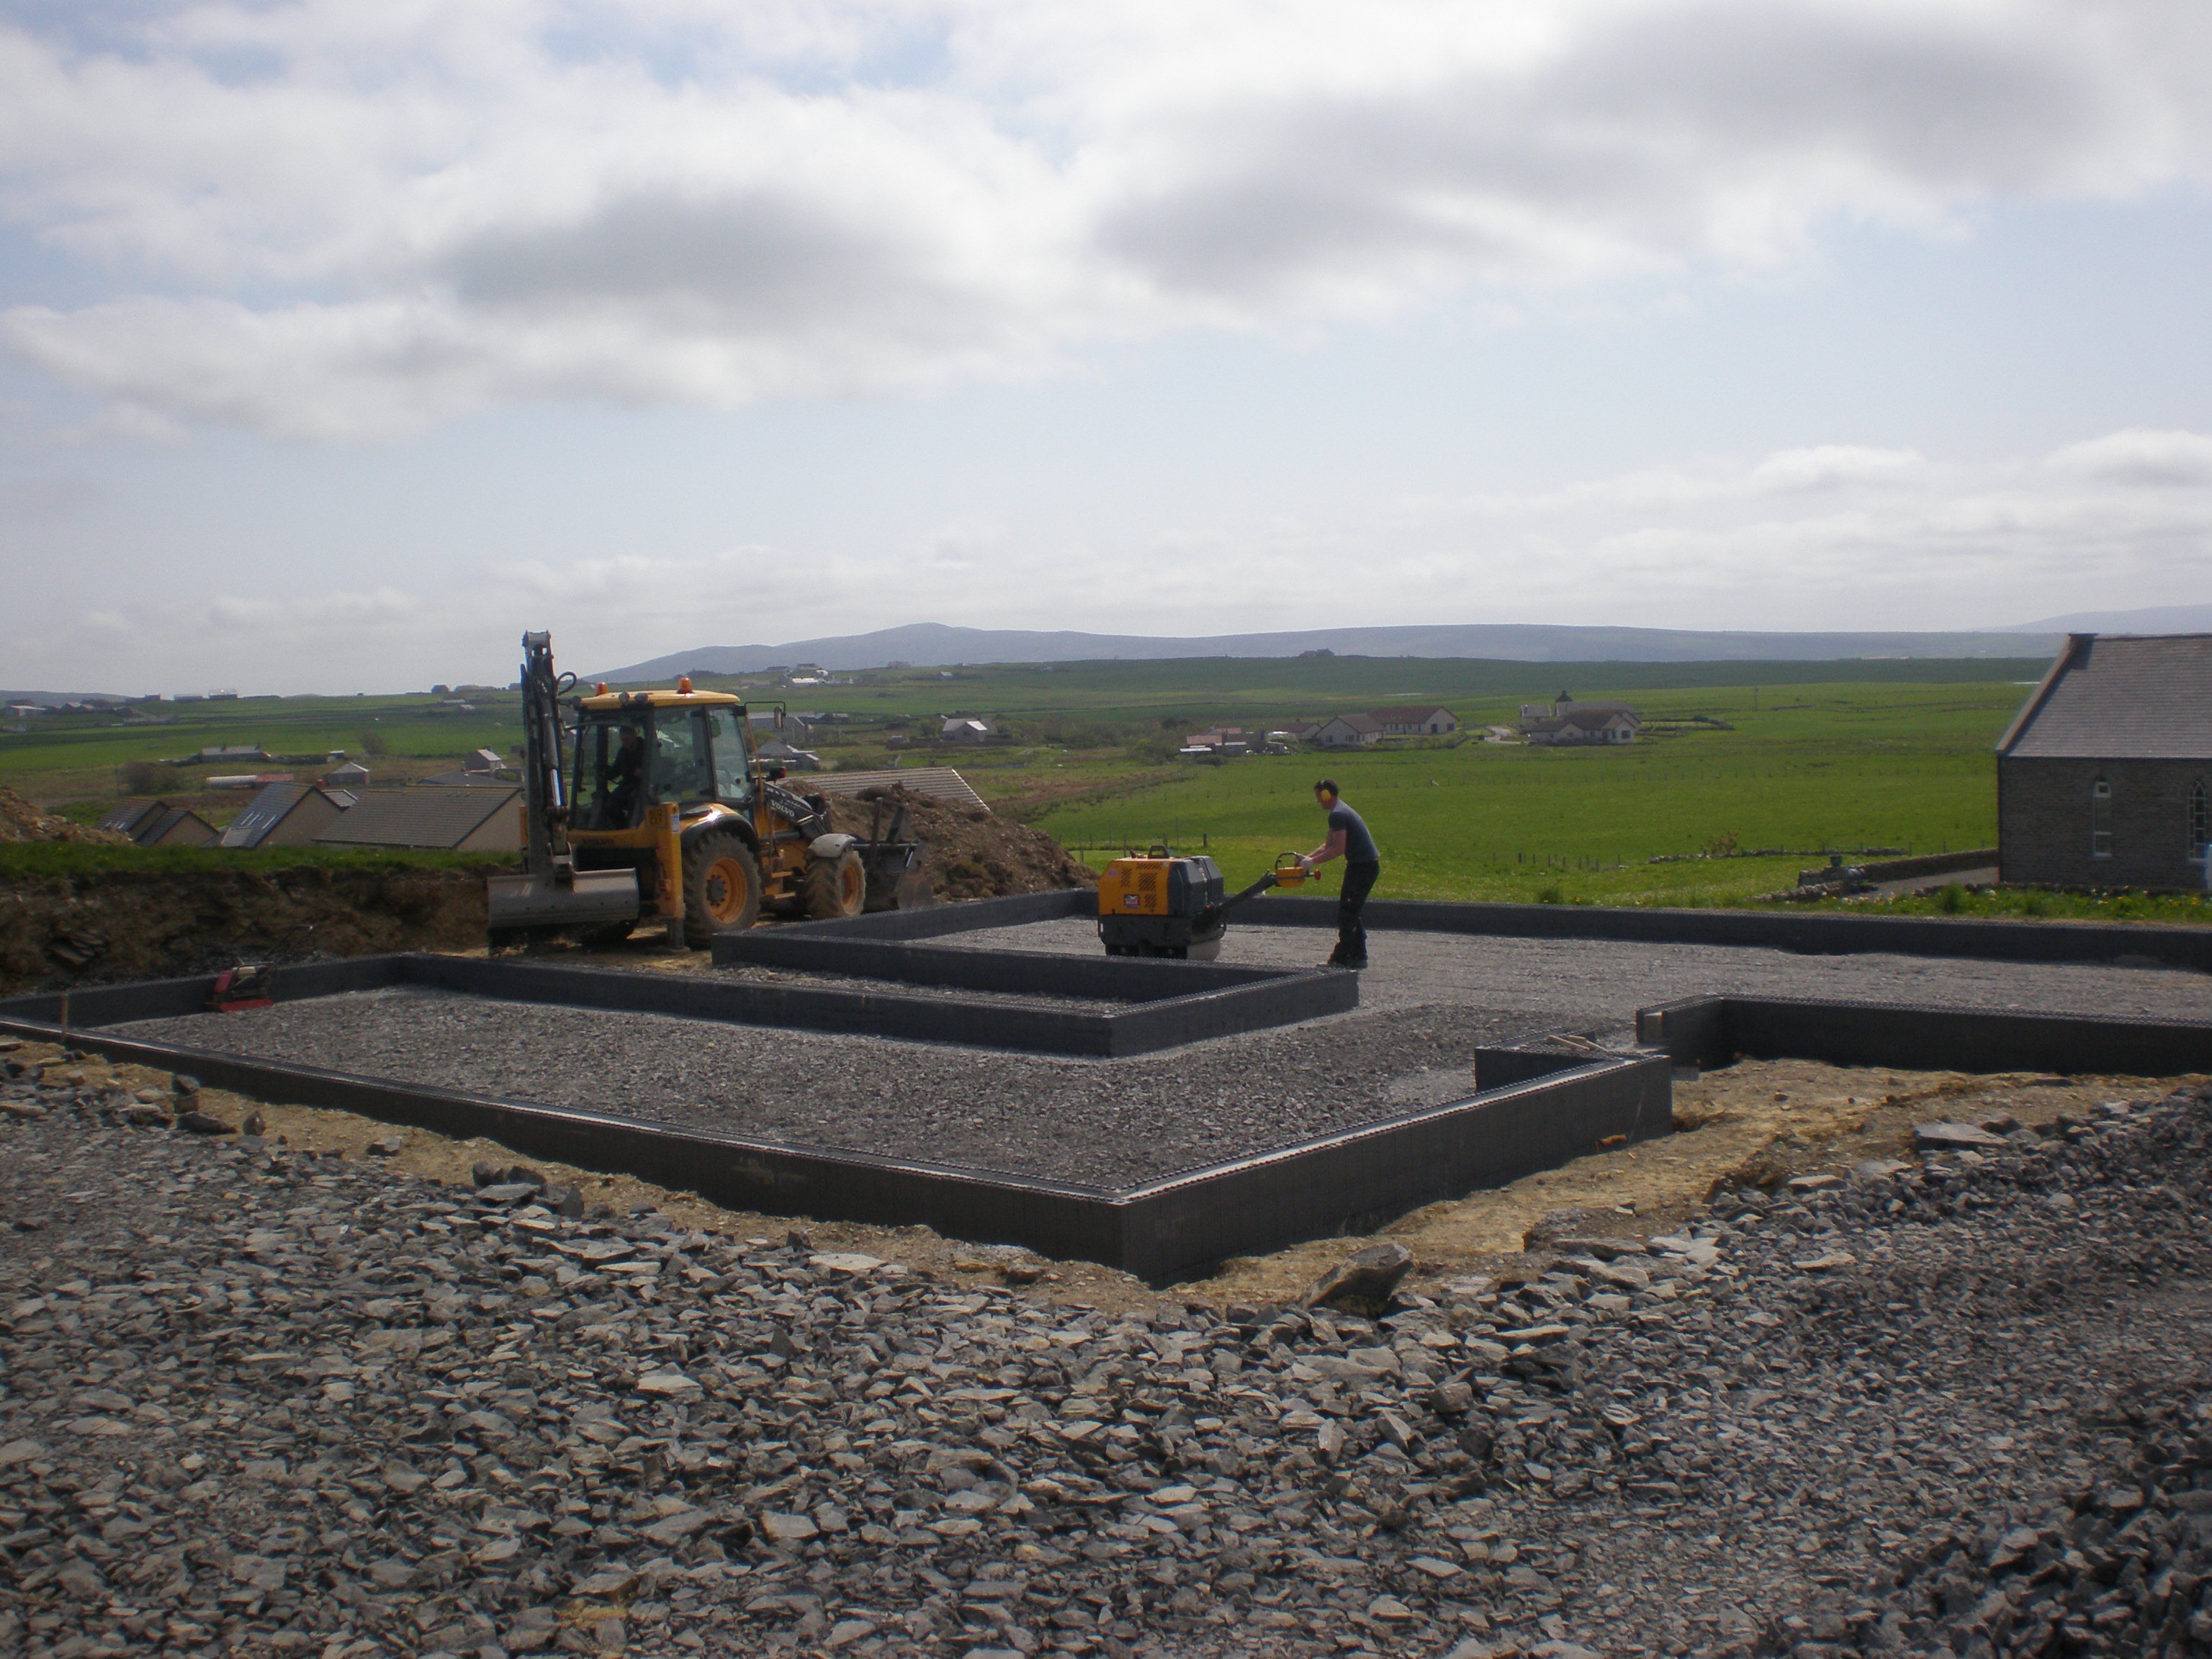 An Orkney Build (in ICF)